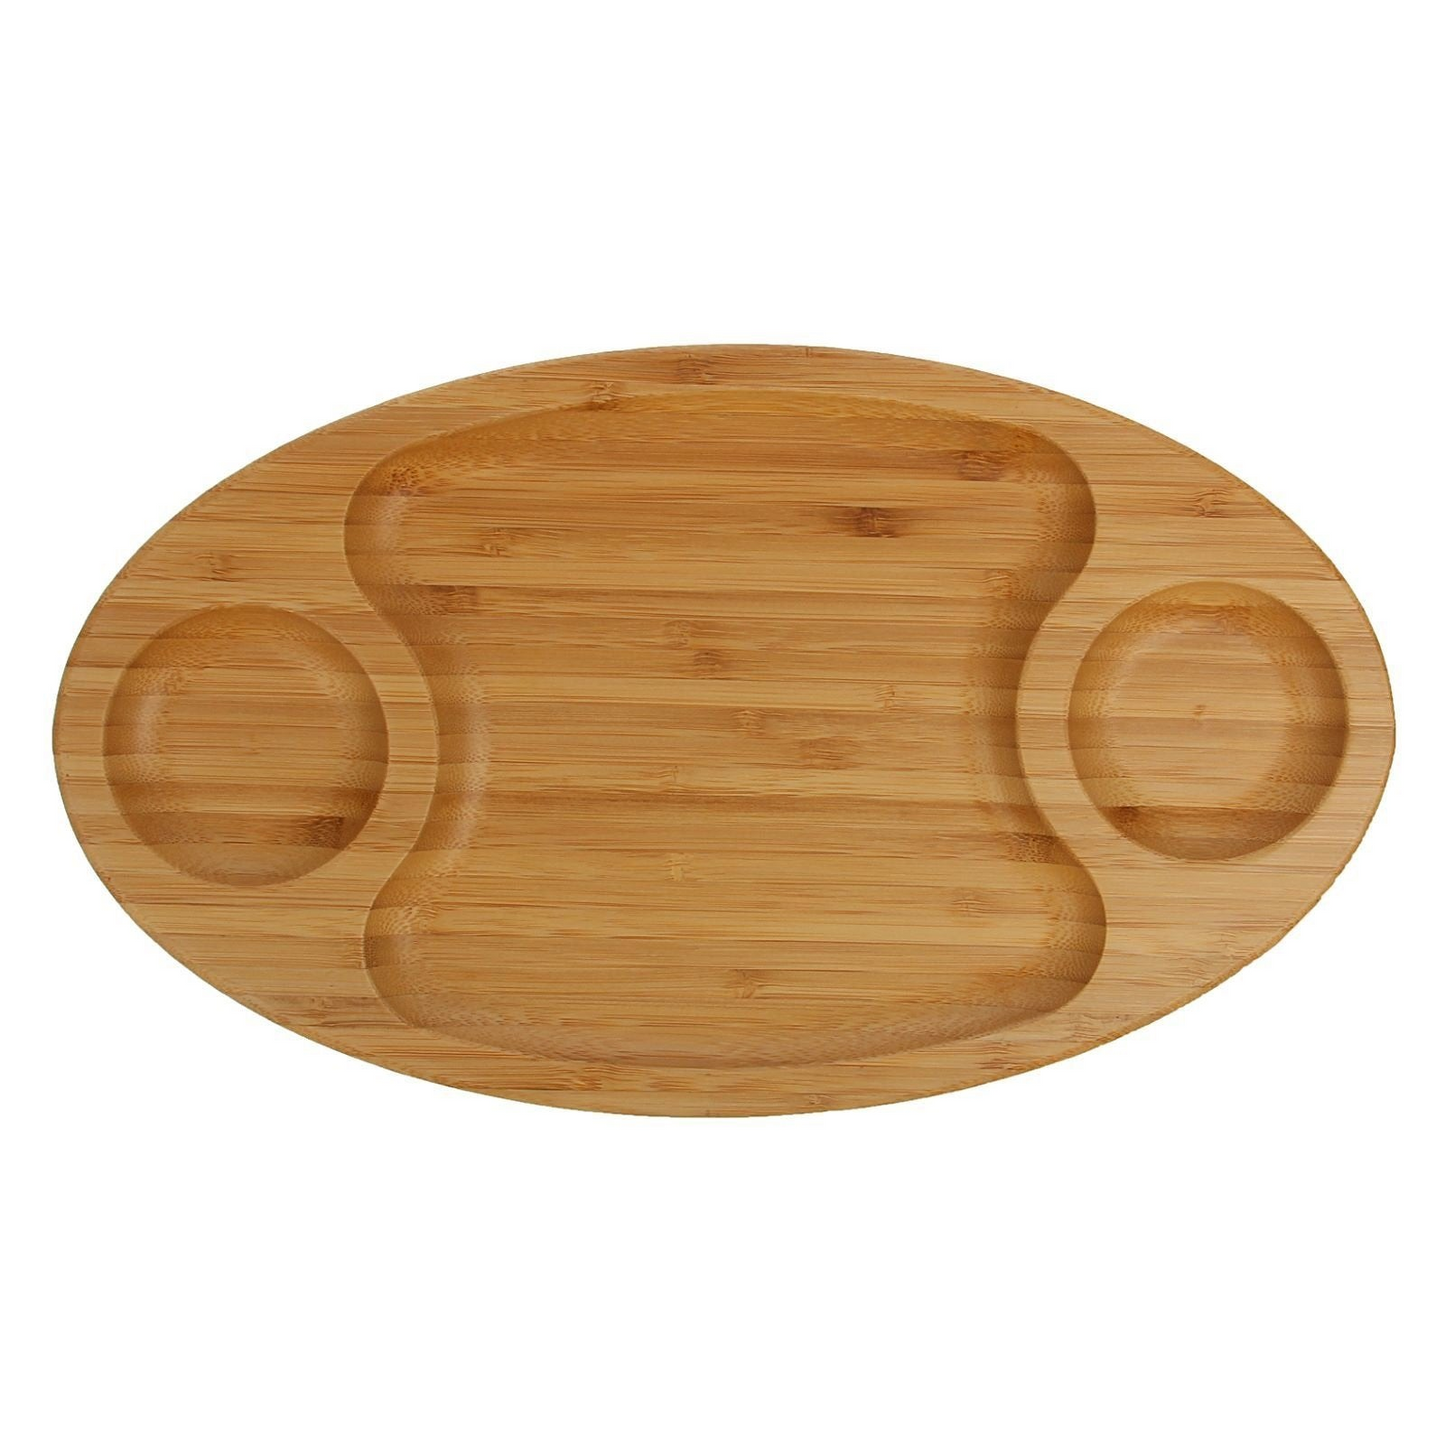 Wilmax Fine Porcelain And Bamboo Serving Tray Combo Set With A Yin Yang 2 Section Saucer WL-555035